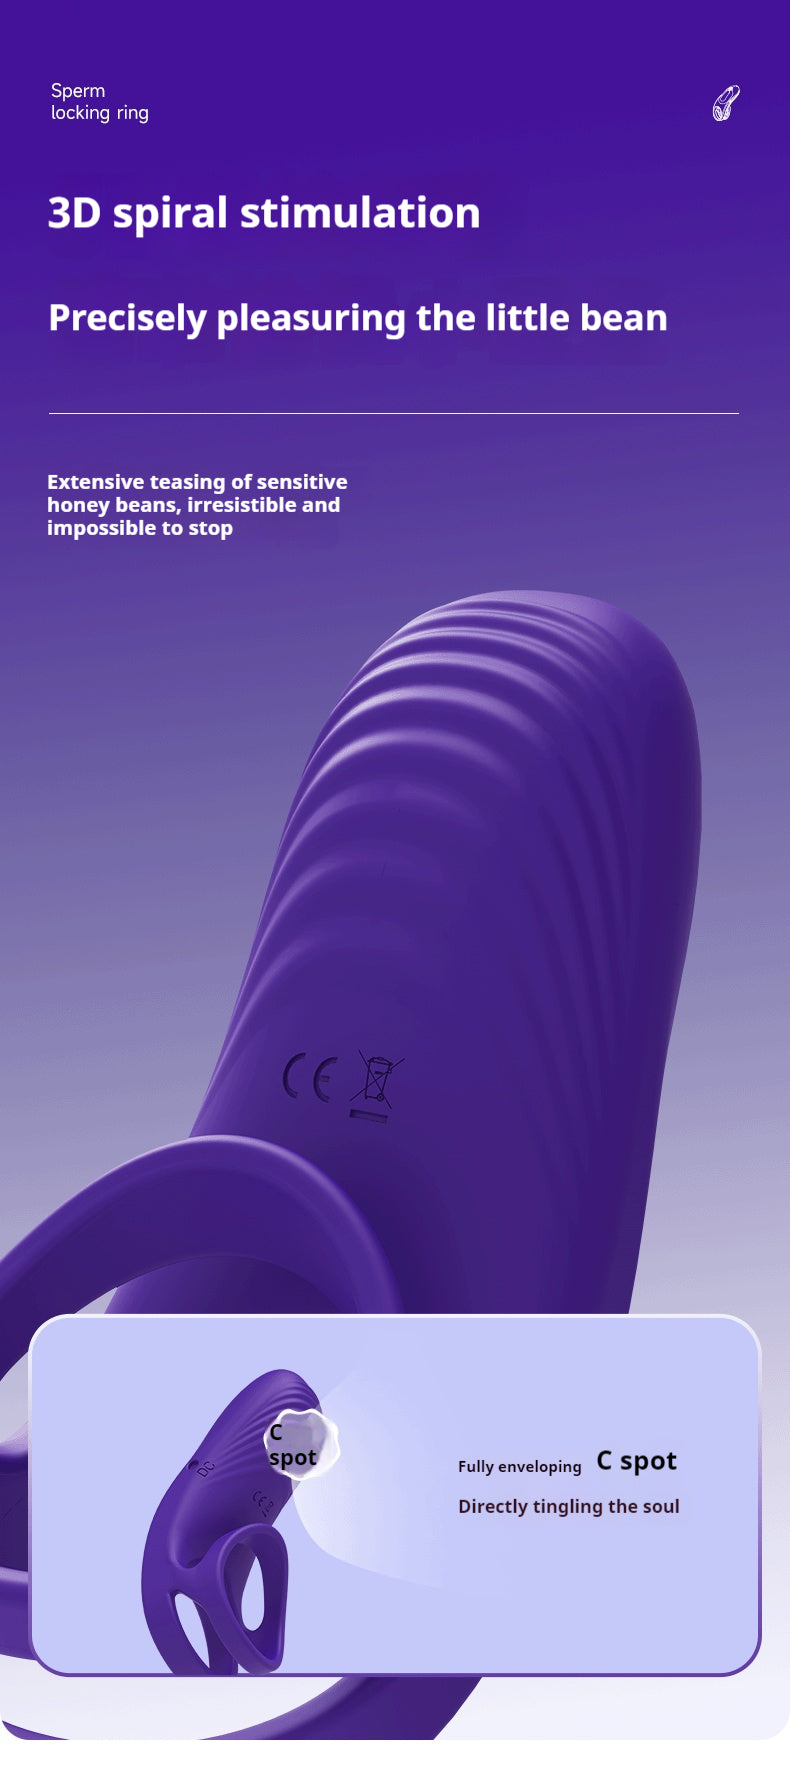 Premium Dual Ring Vibrating Cock Ring - Remote Controlled